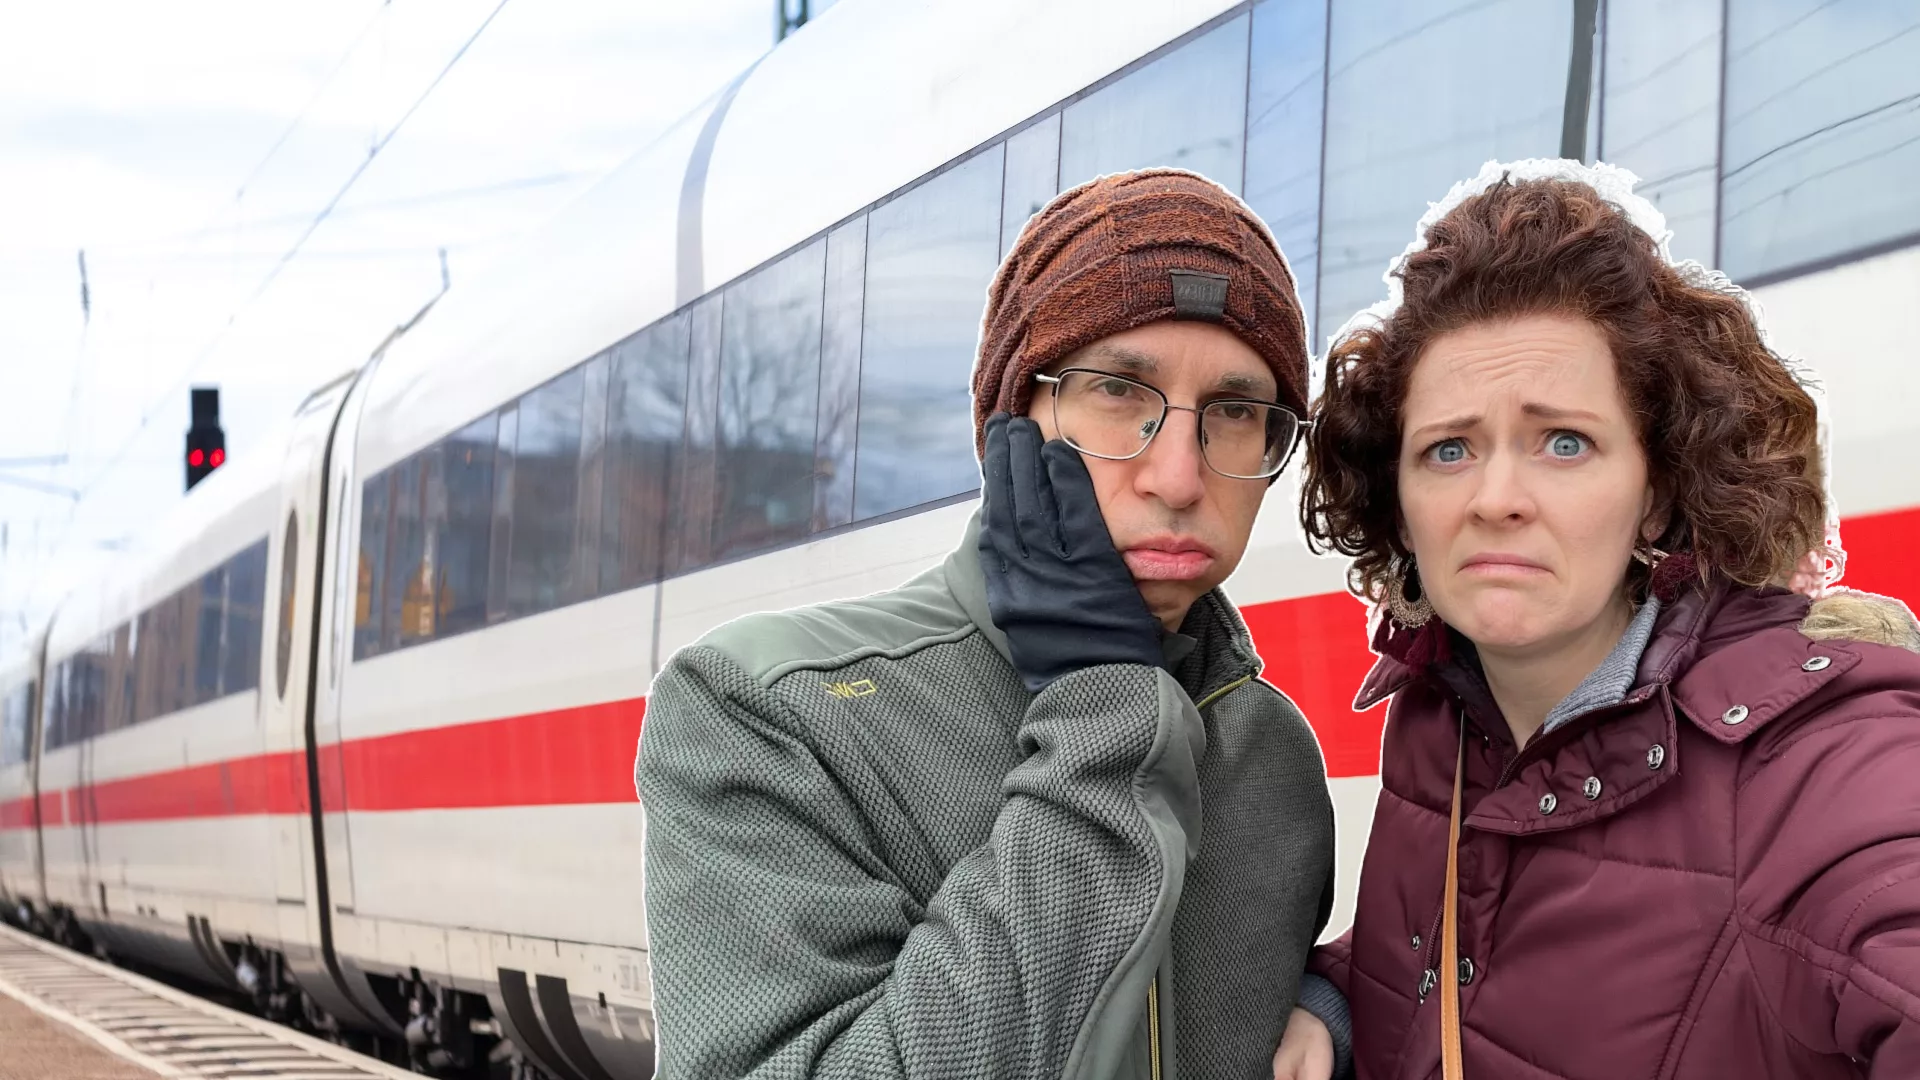 Our First ICE Train Trip in Germany - it's not as glamorous as the movies!